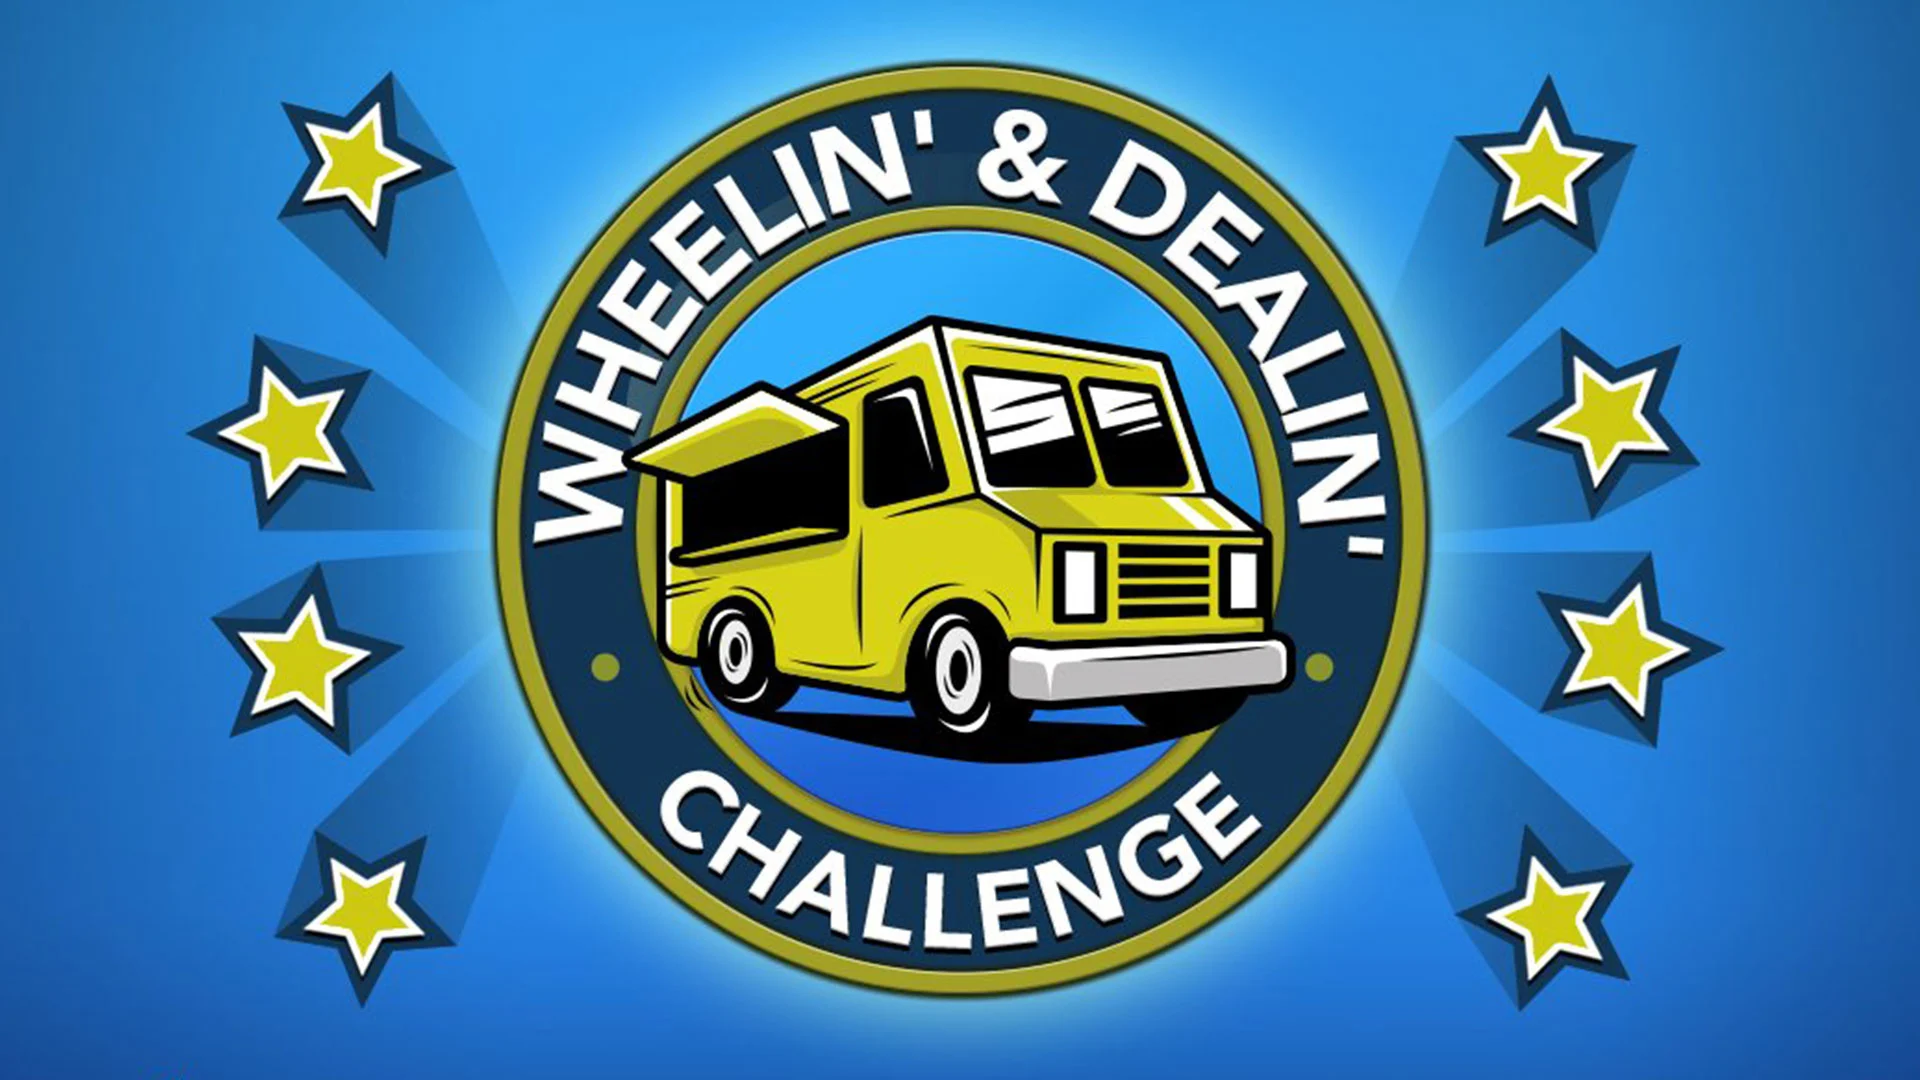 How to Complete the Wheelin' and Dealin' Challenge in BitLife